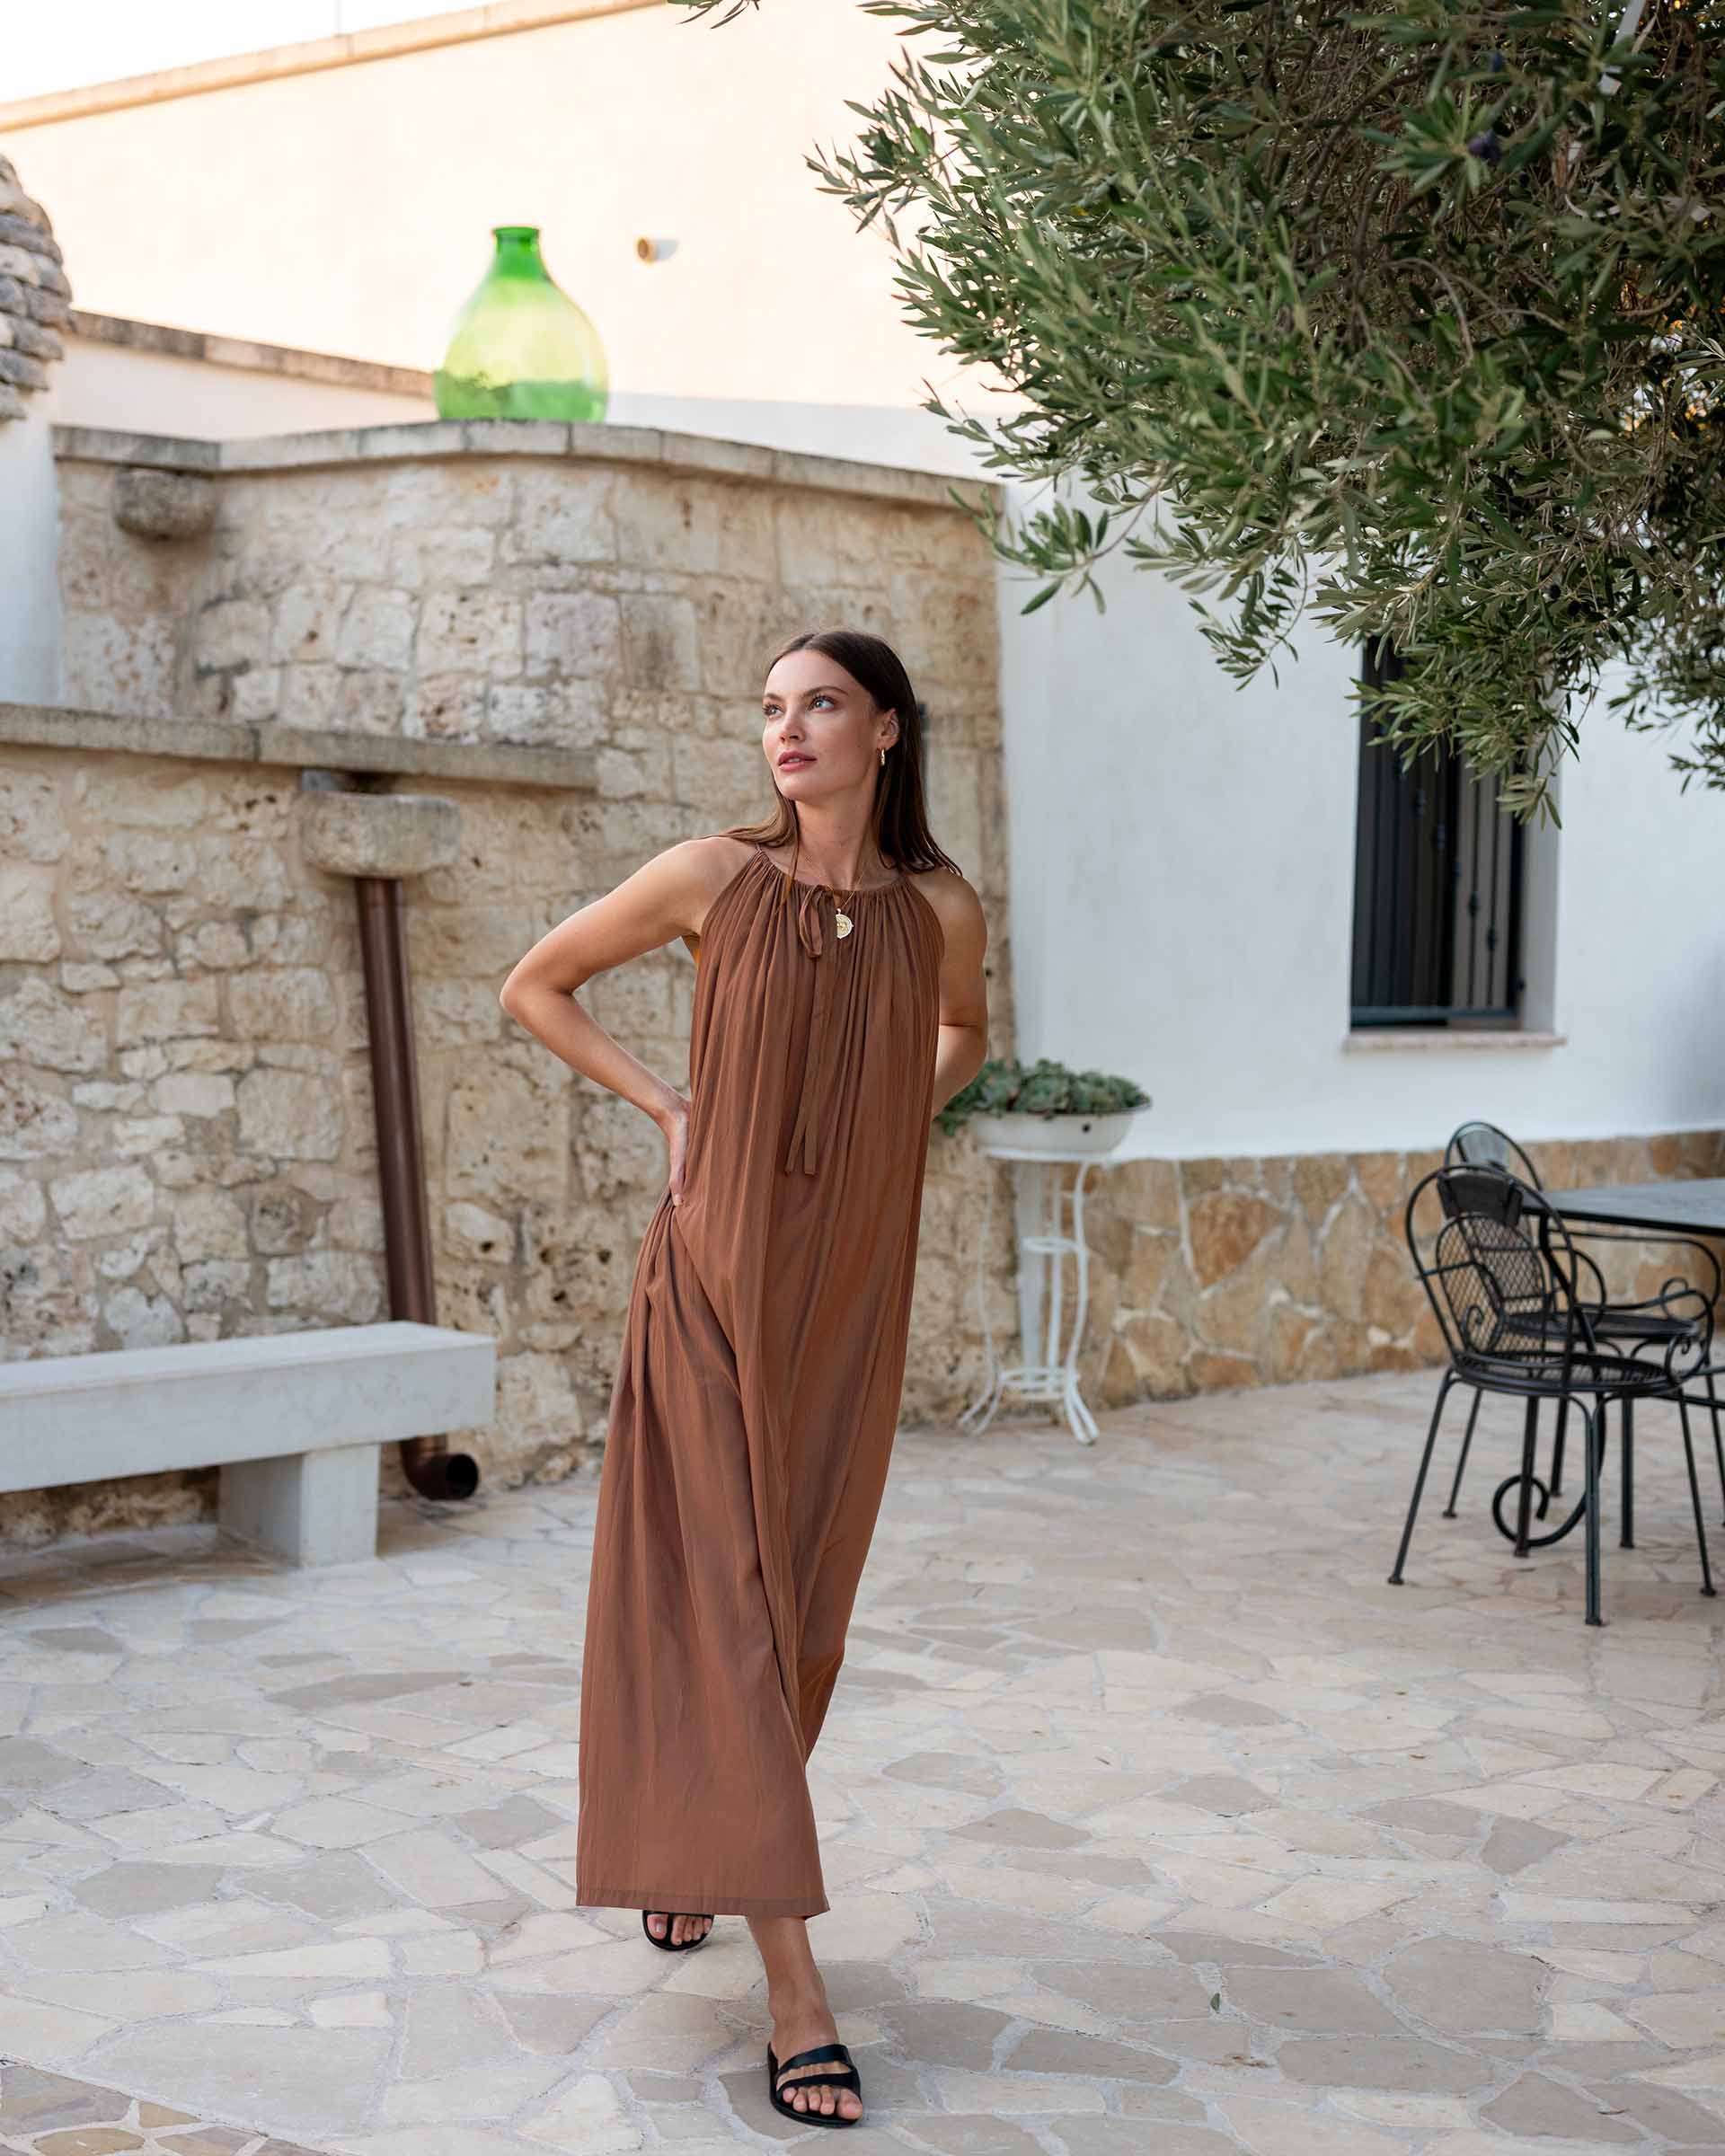 Women's Light Brown Loose Fit Pullover Maxi Dress Front View Full Body Front View with Hands on Head